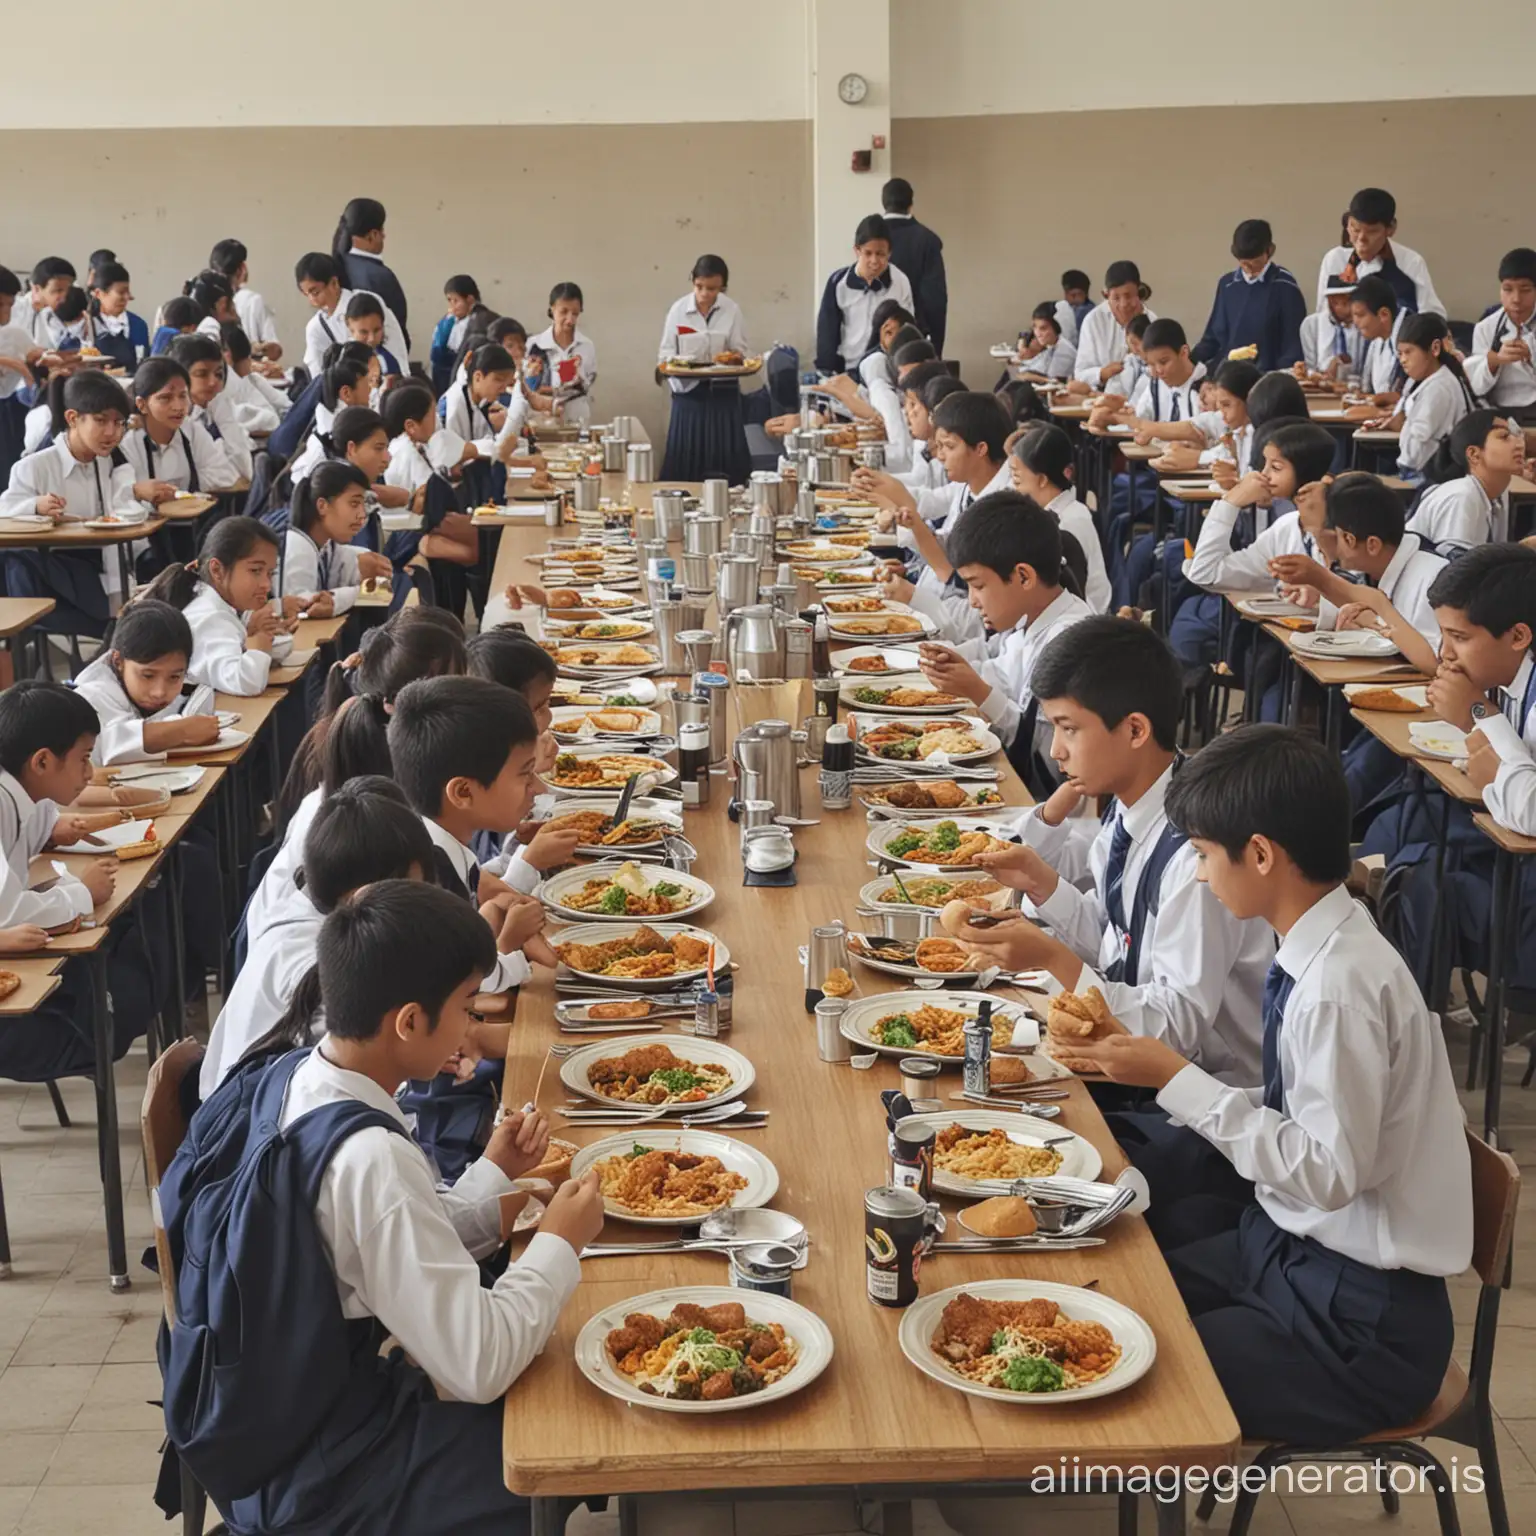 Students-Enjoying-Delicious-Meals-in-School-Canteen